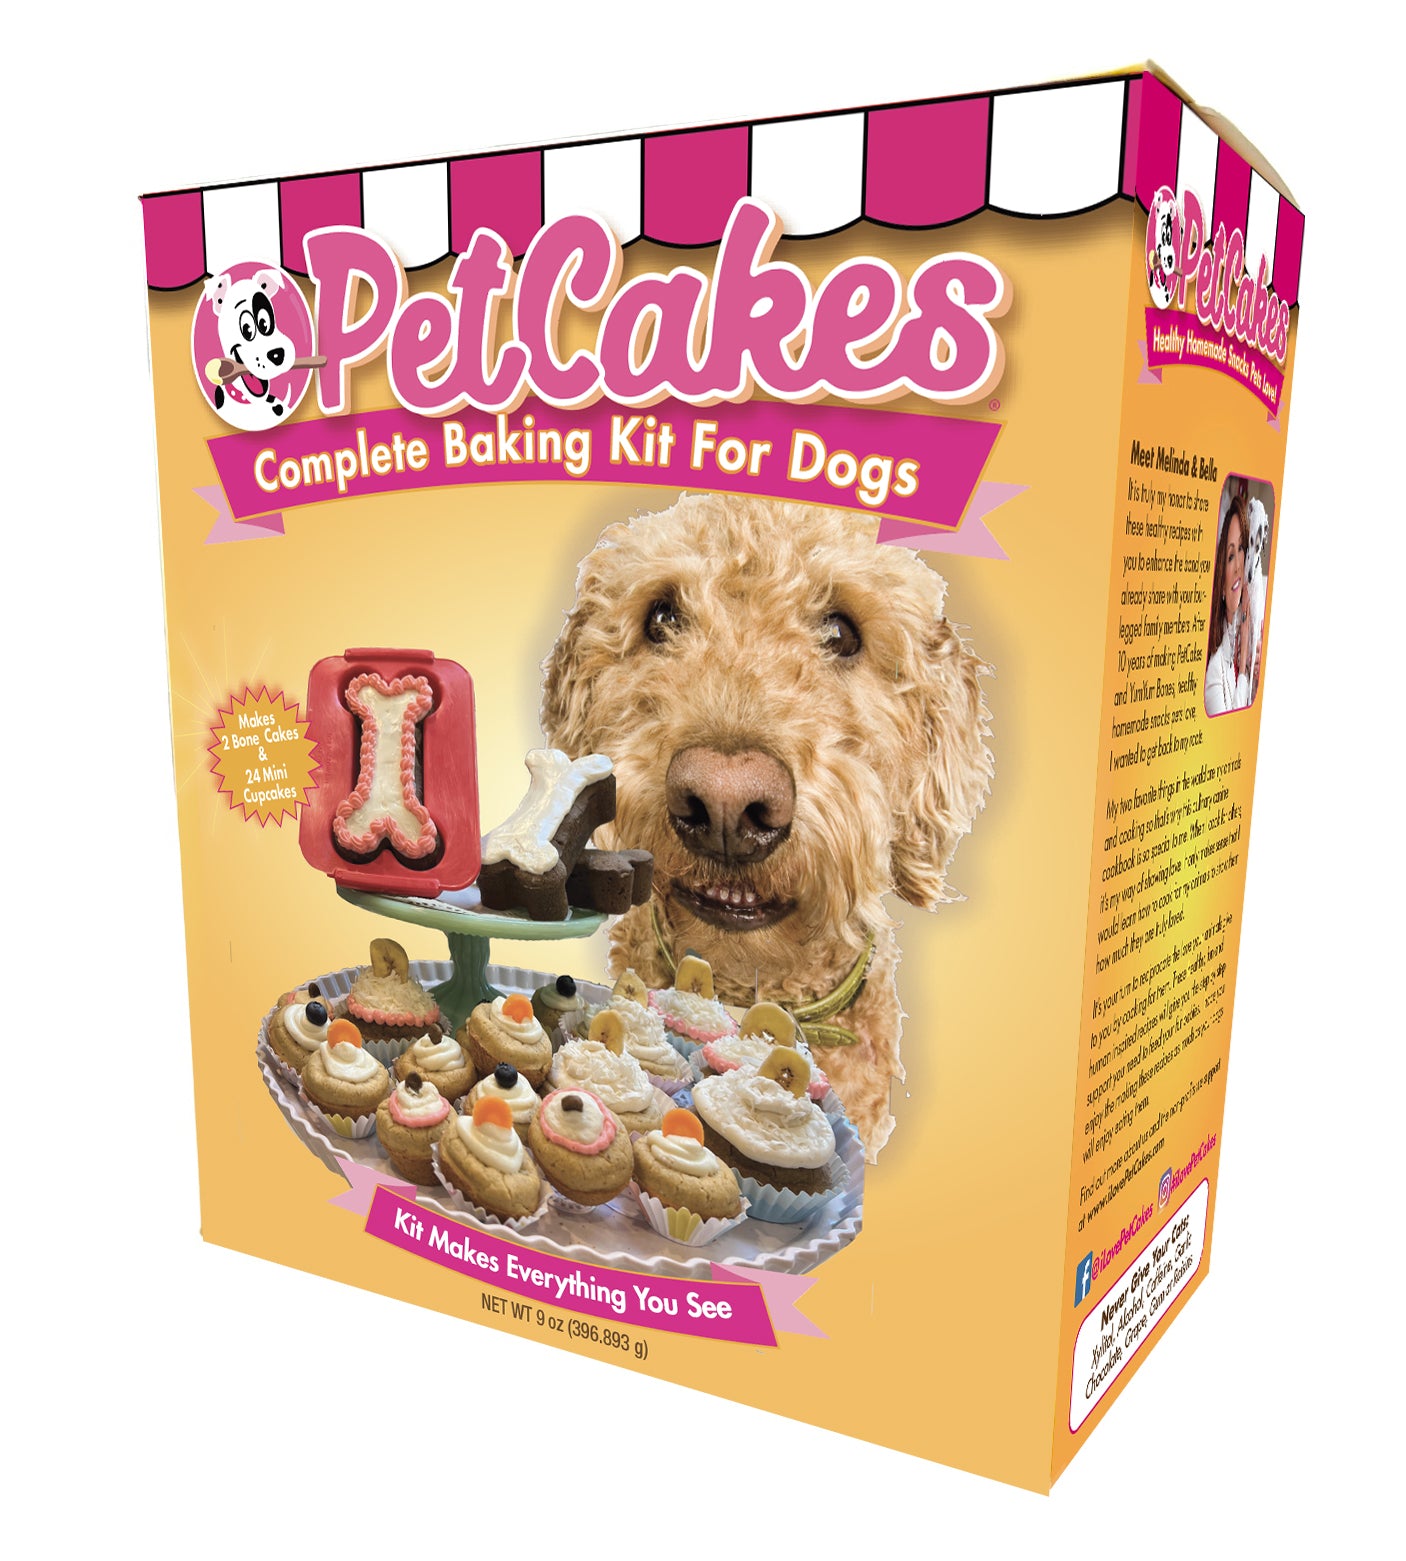 Complete Baking Kits for Dogs - 4 Cakes